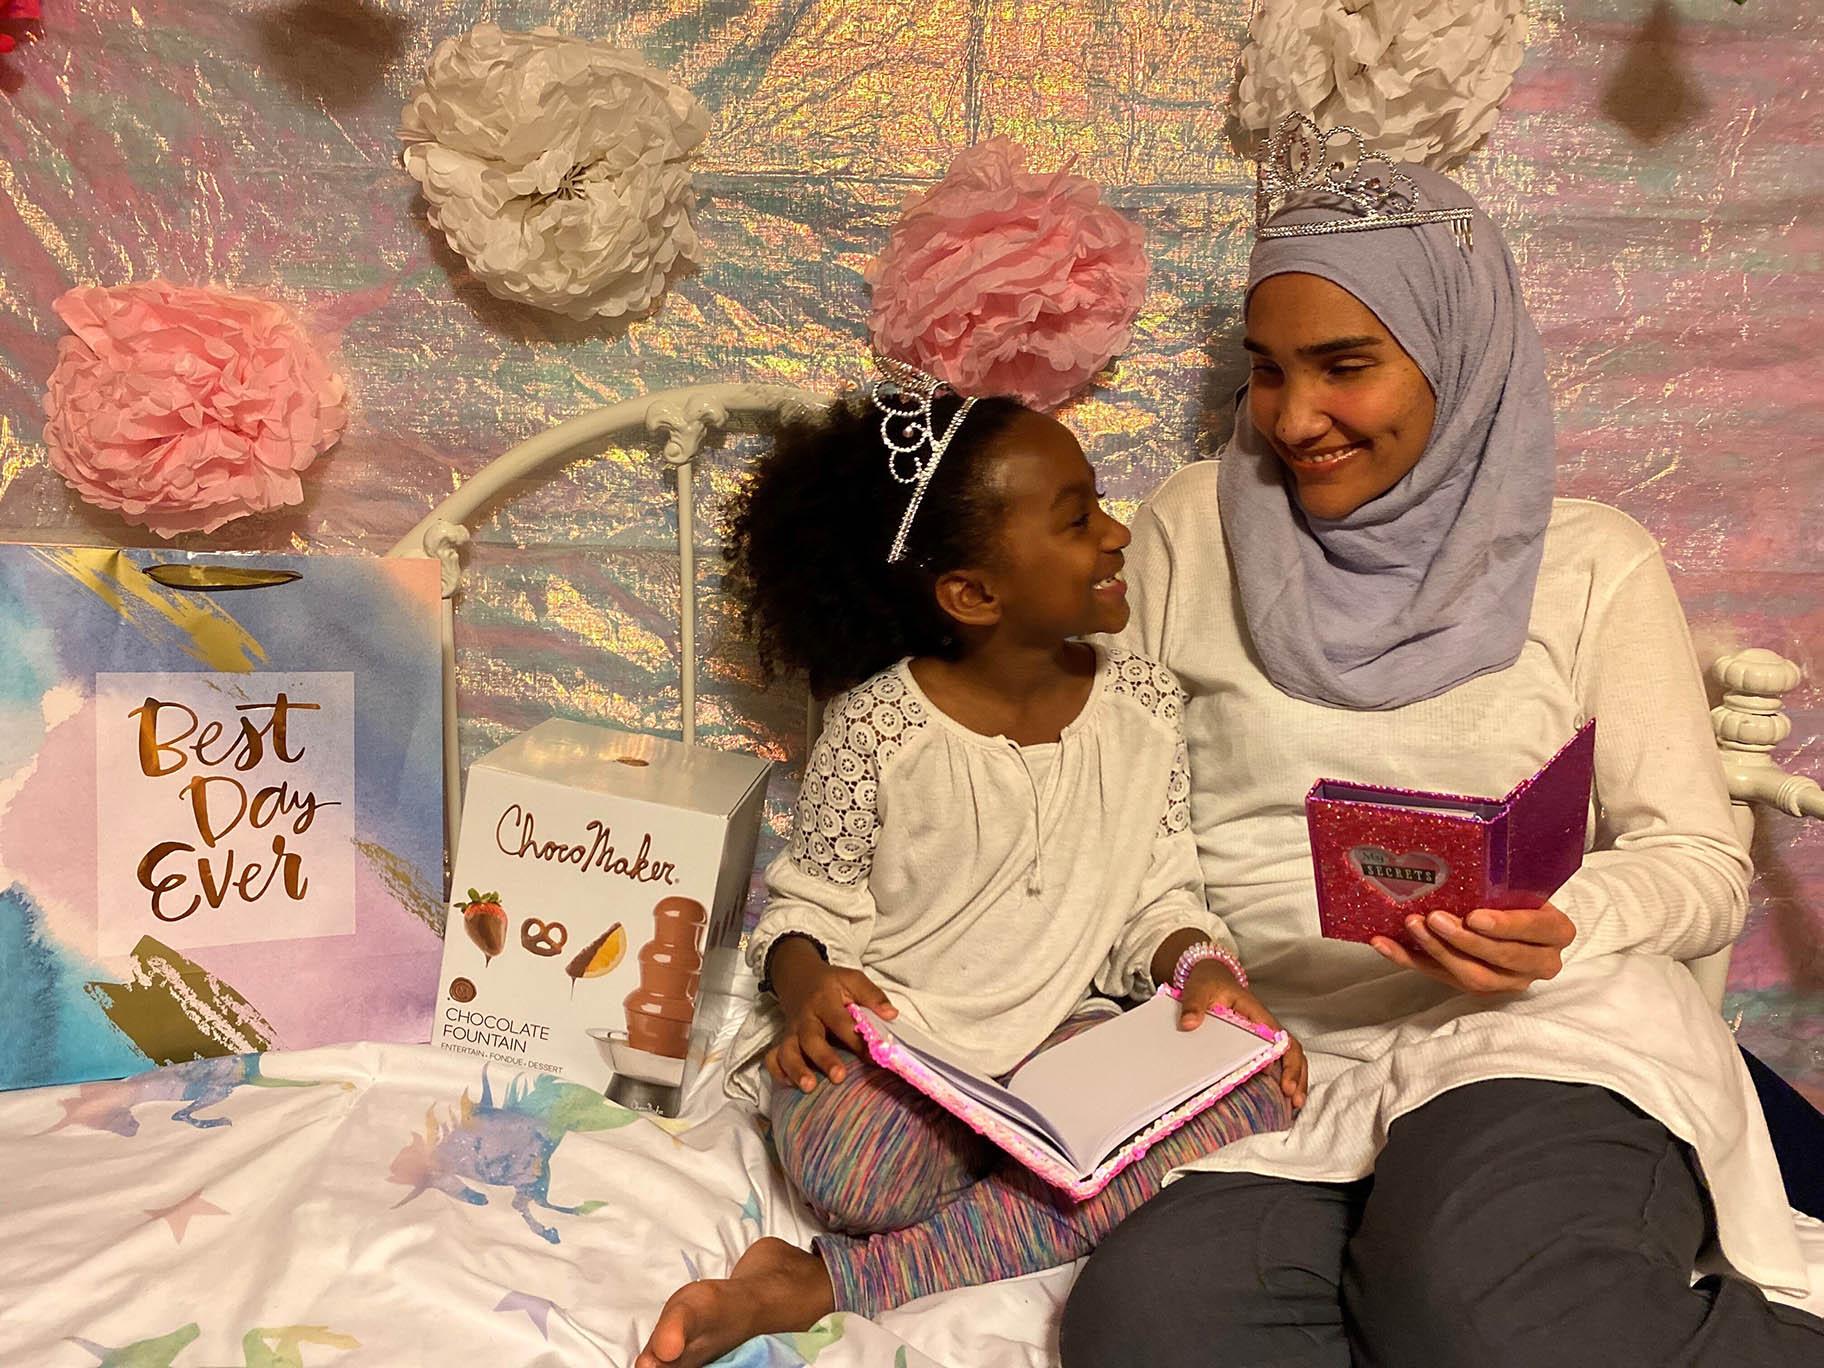 This undated photo shows Melissa Mueller-Douglas and her 7-year-old daughter, Nurah, at their home in Rochester, N.Y. with some of the items they plan to use for a Mother’s Day sleepover. (Yakub Shabazz via AP)